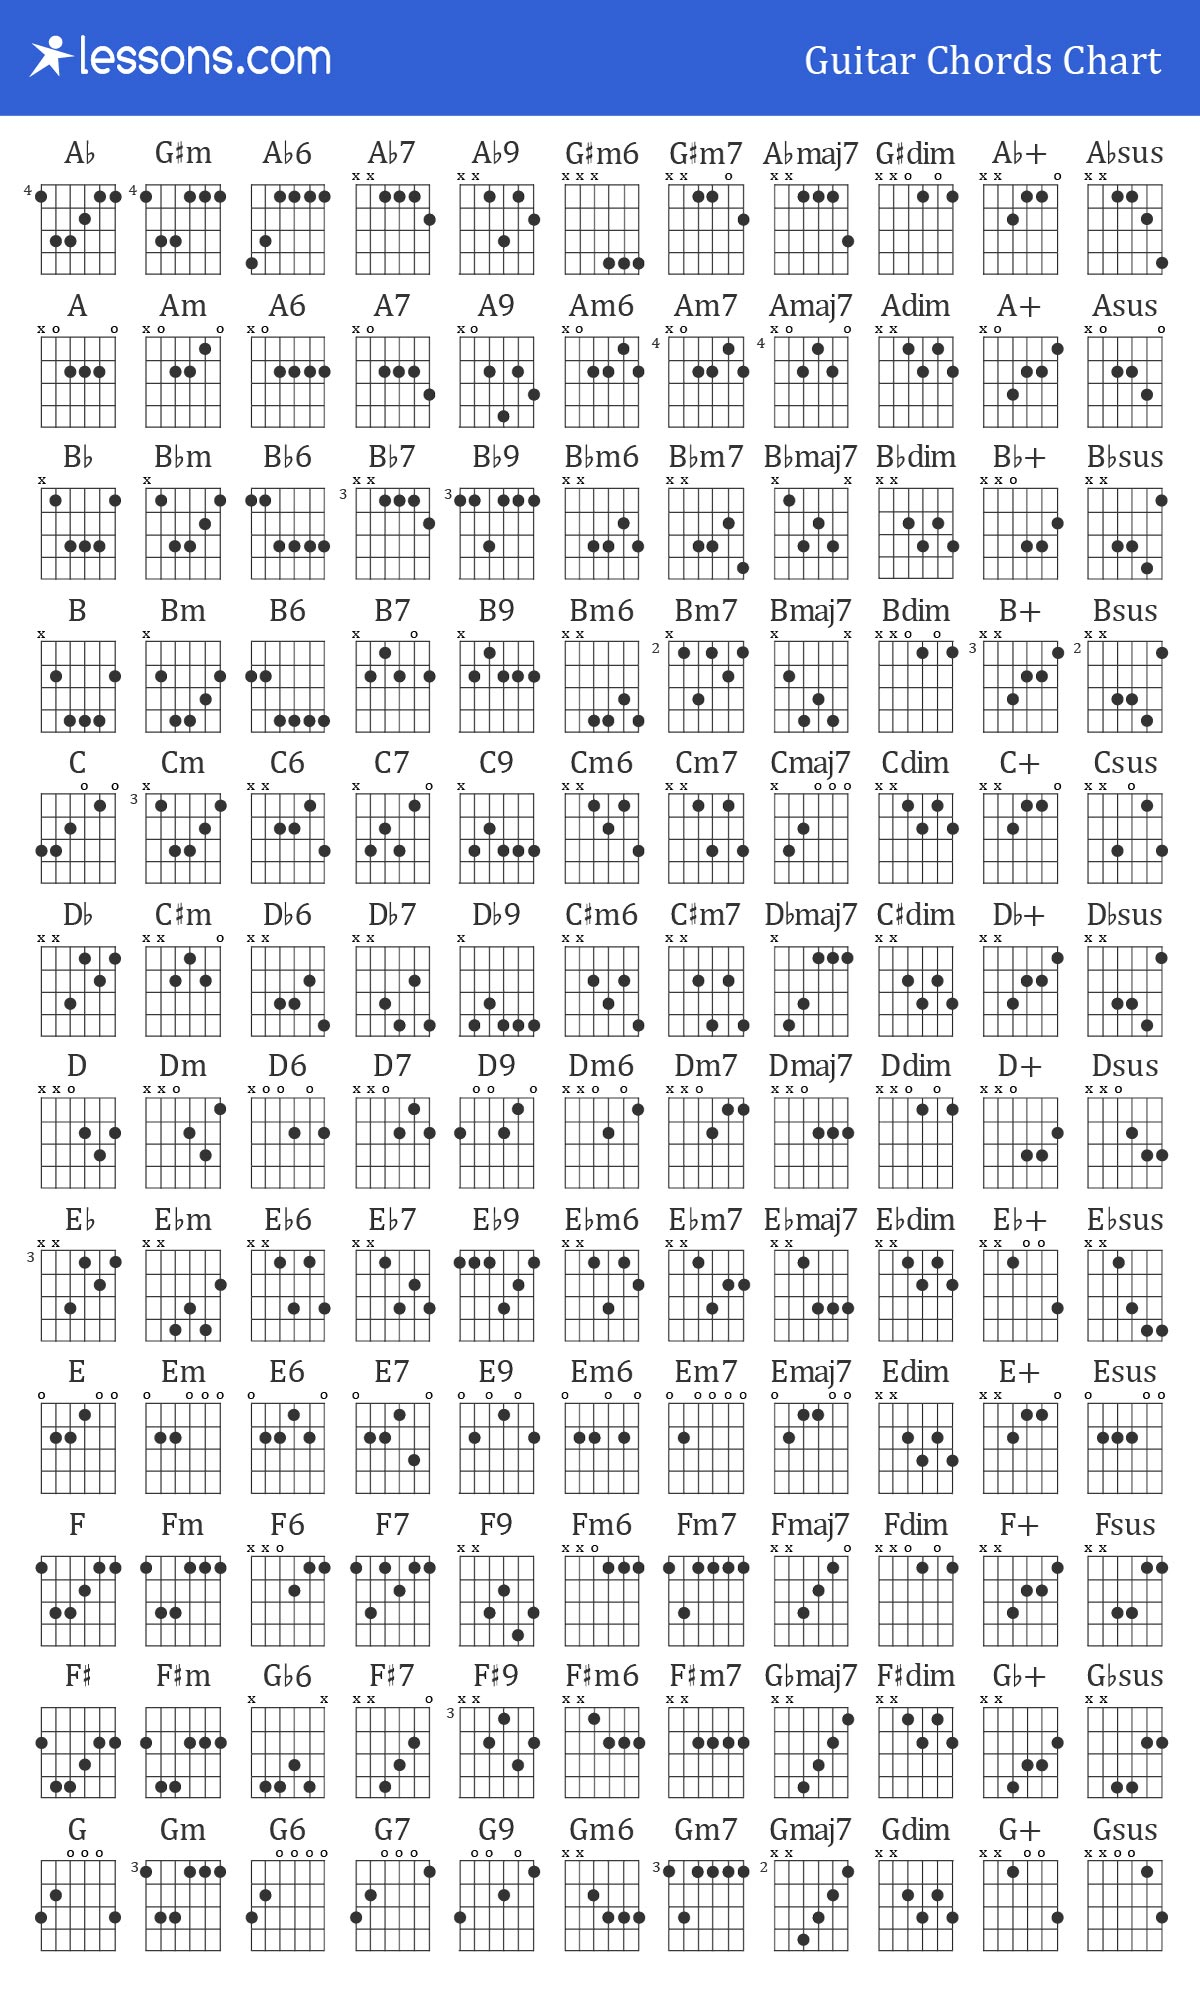 Chords For Guitar The 100 Best Guitar Chords Chart Beginner To Advanced